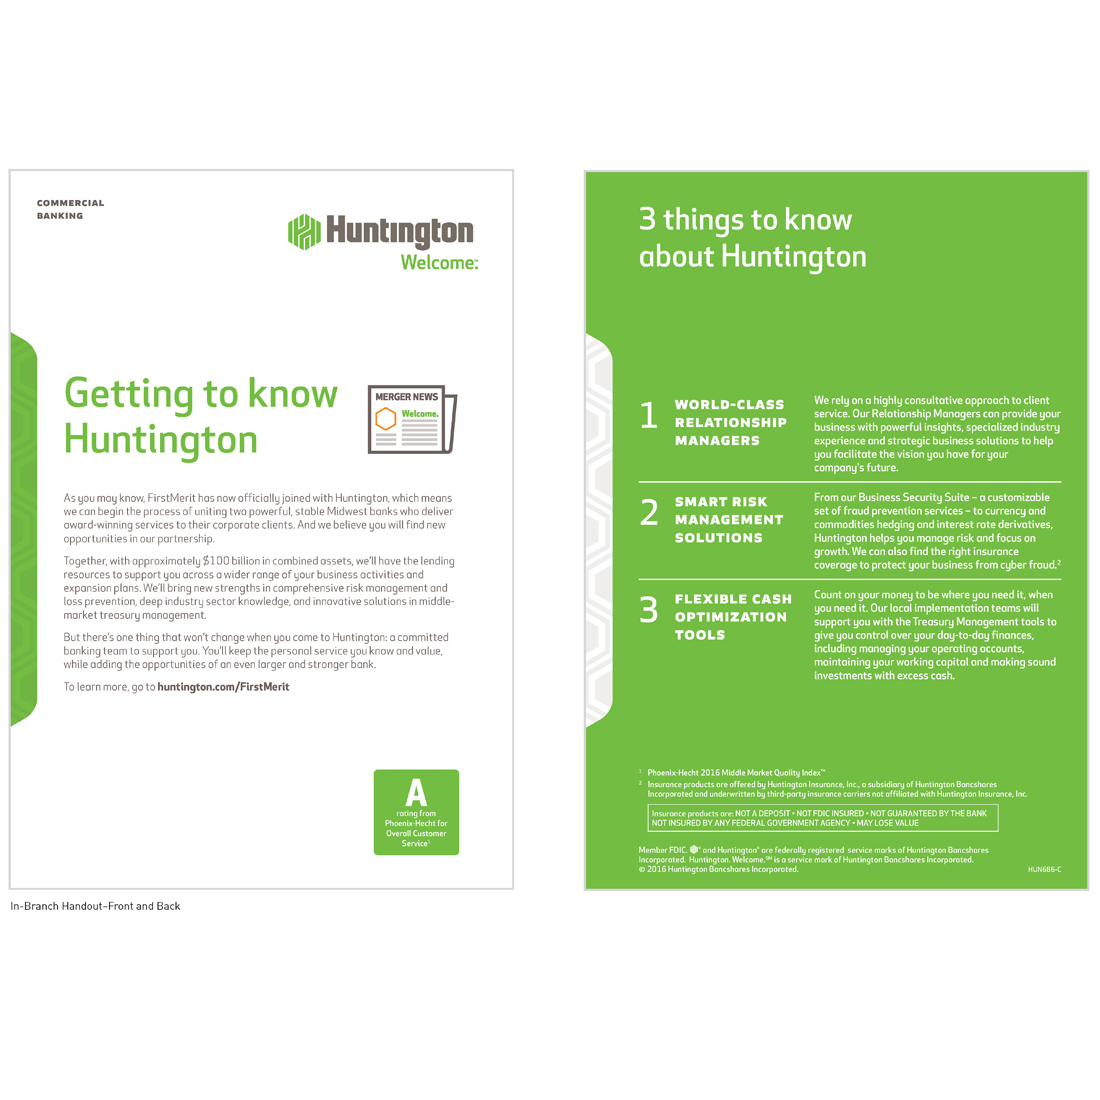 Huntington pre-conversion in-branch handout, front and back